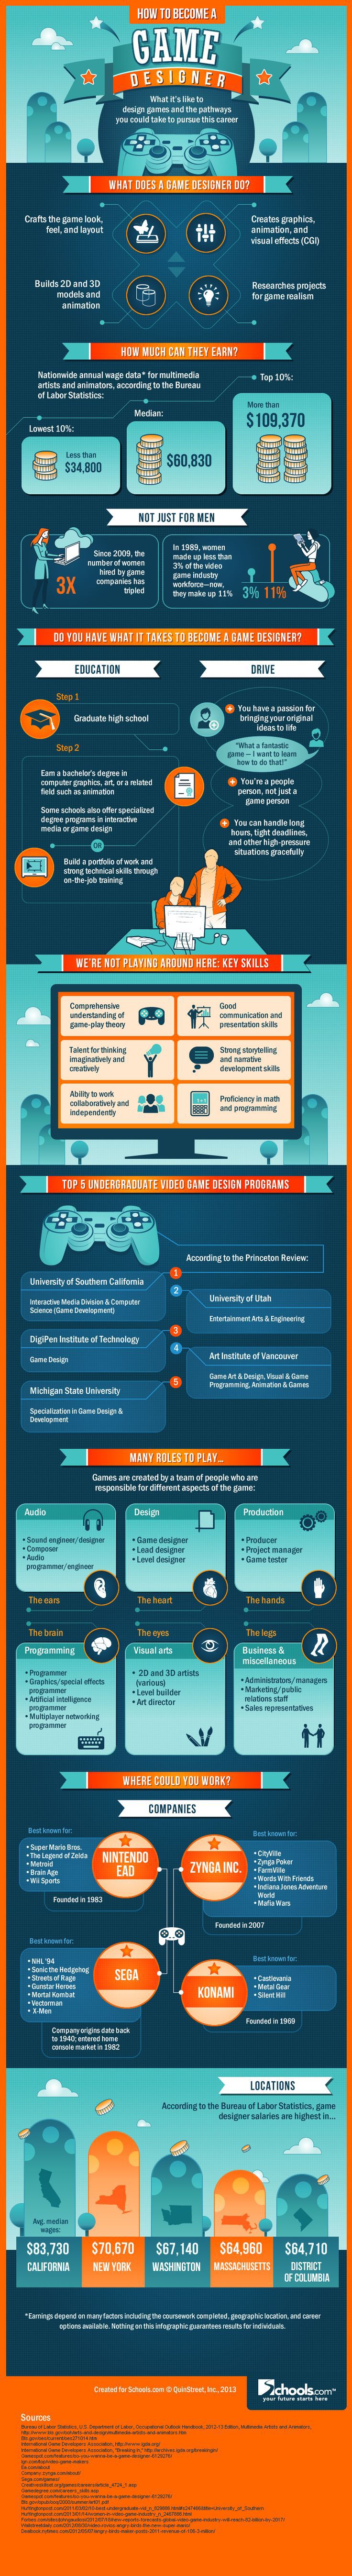 How to Become A Game Designer